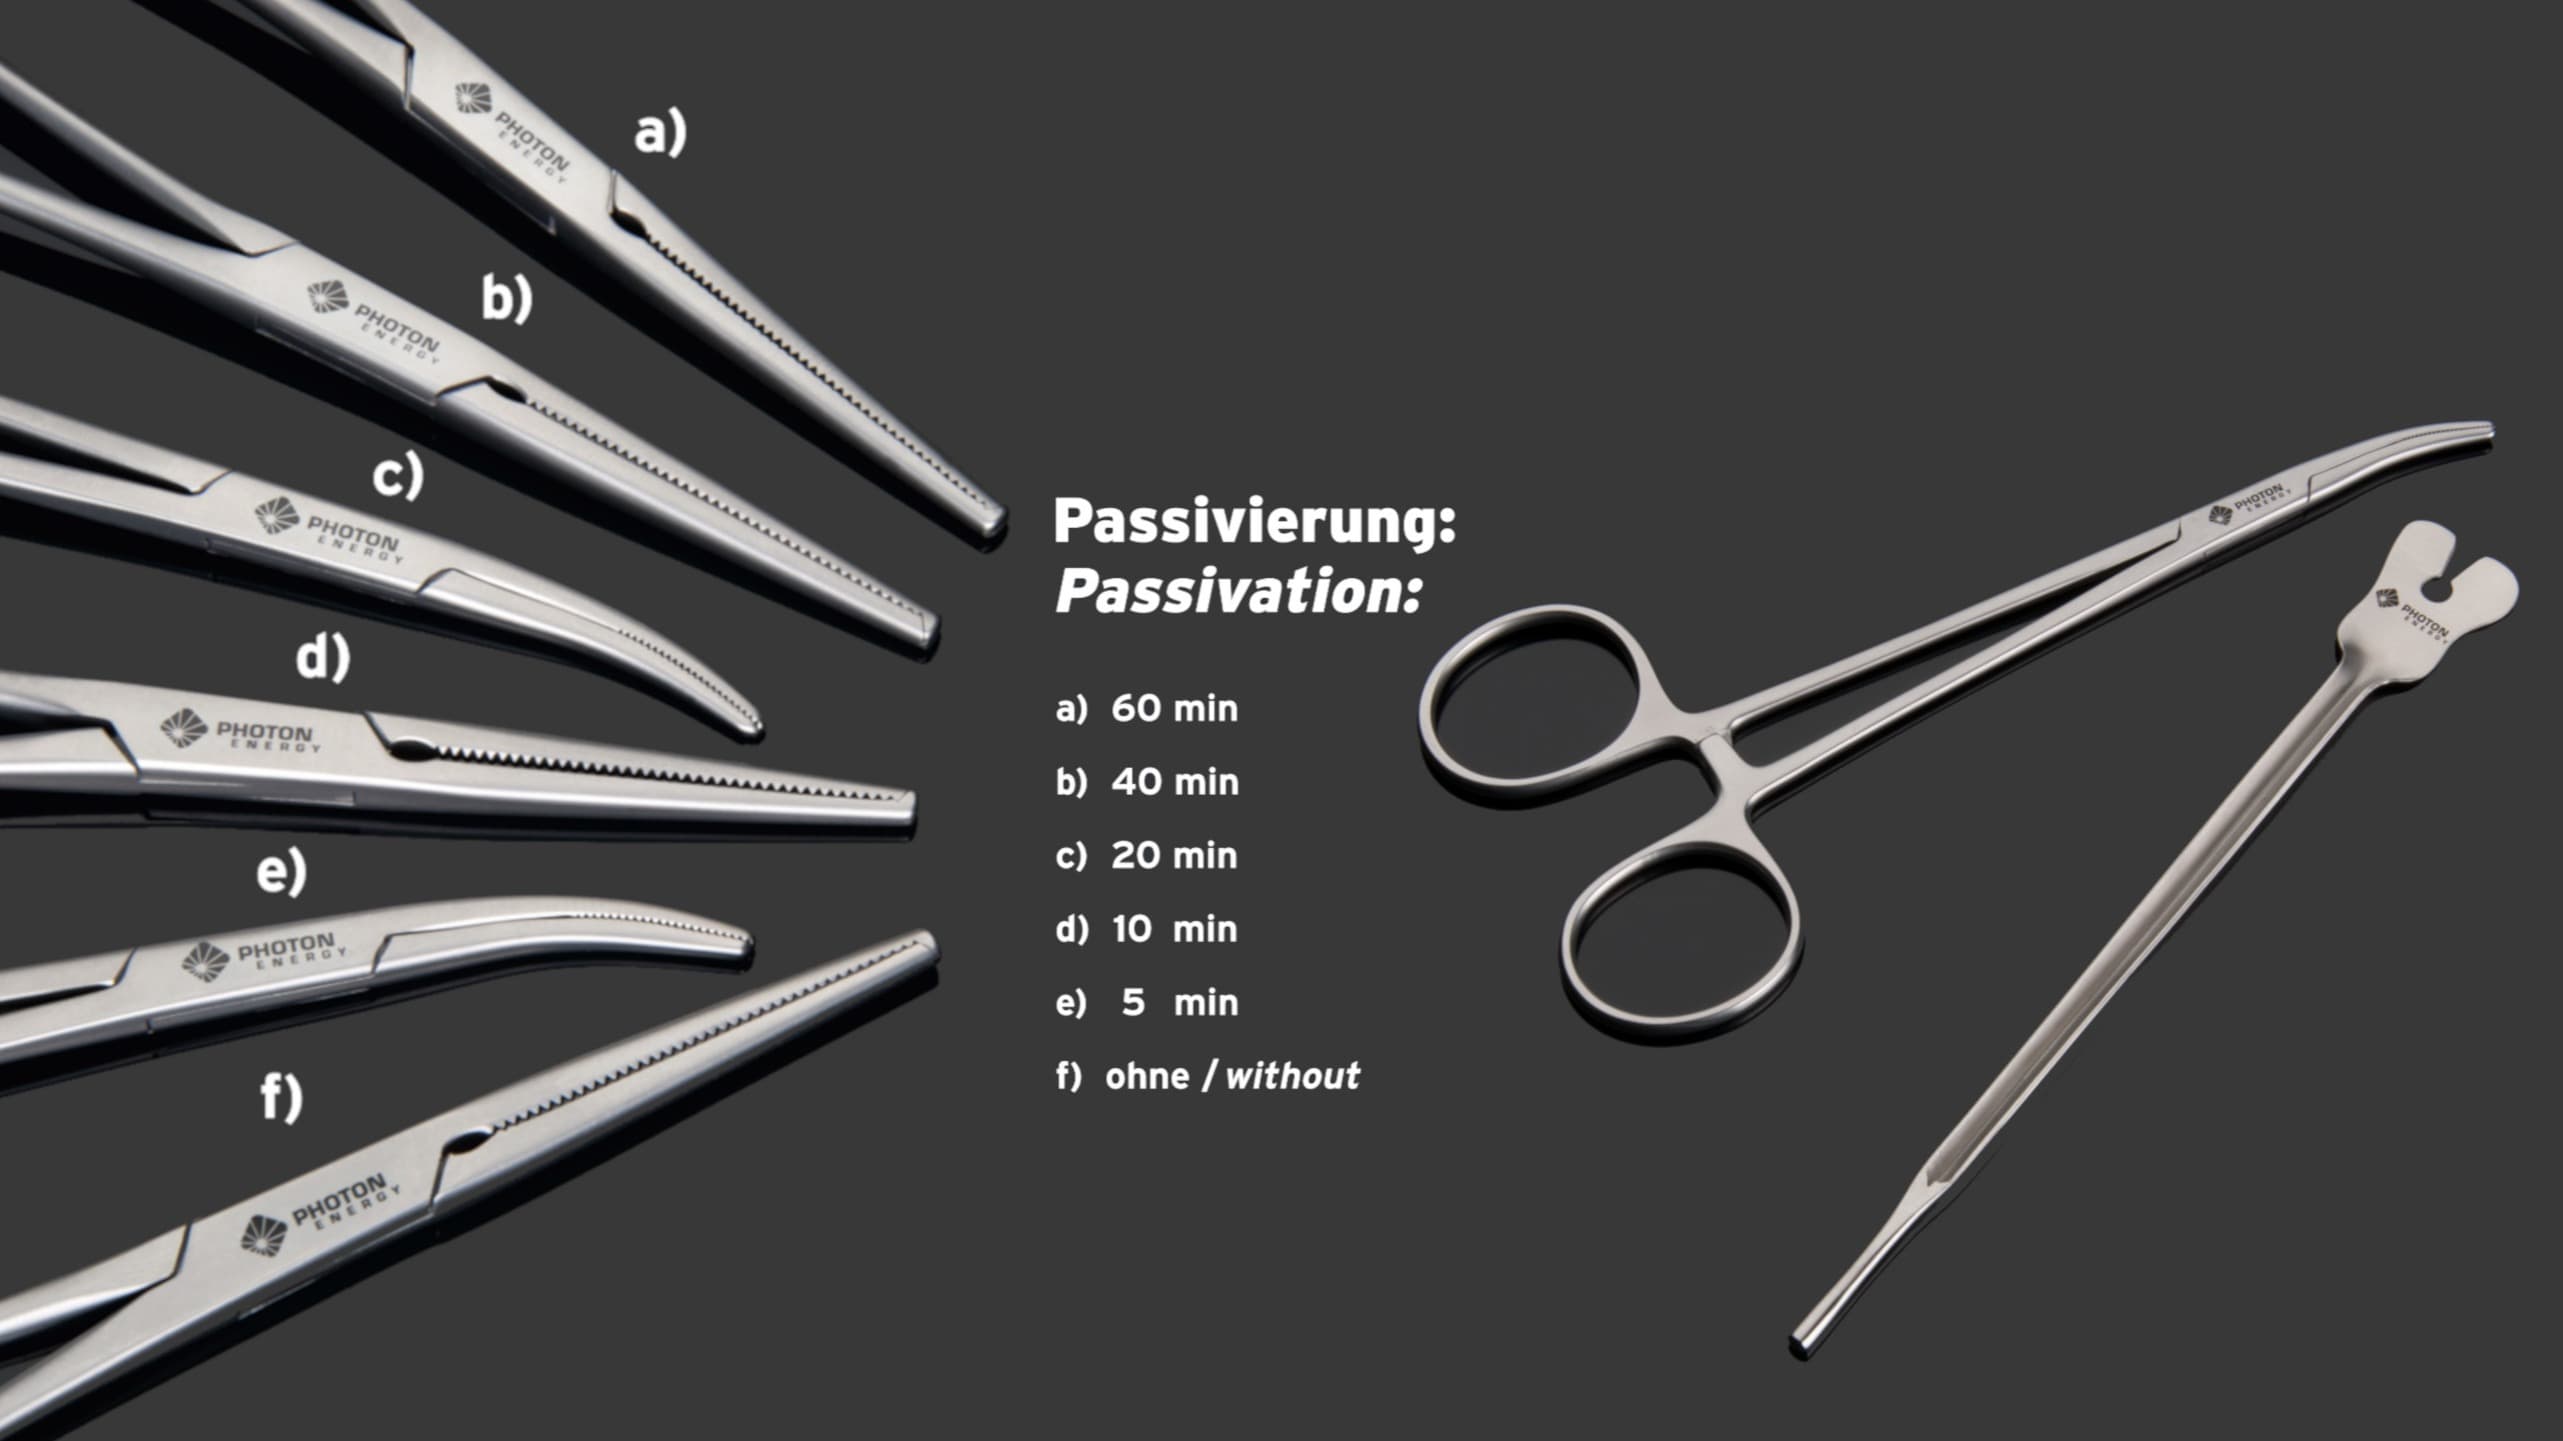 Durability of PERMAblack markings on medical instruments despite passivation.